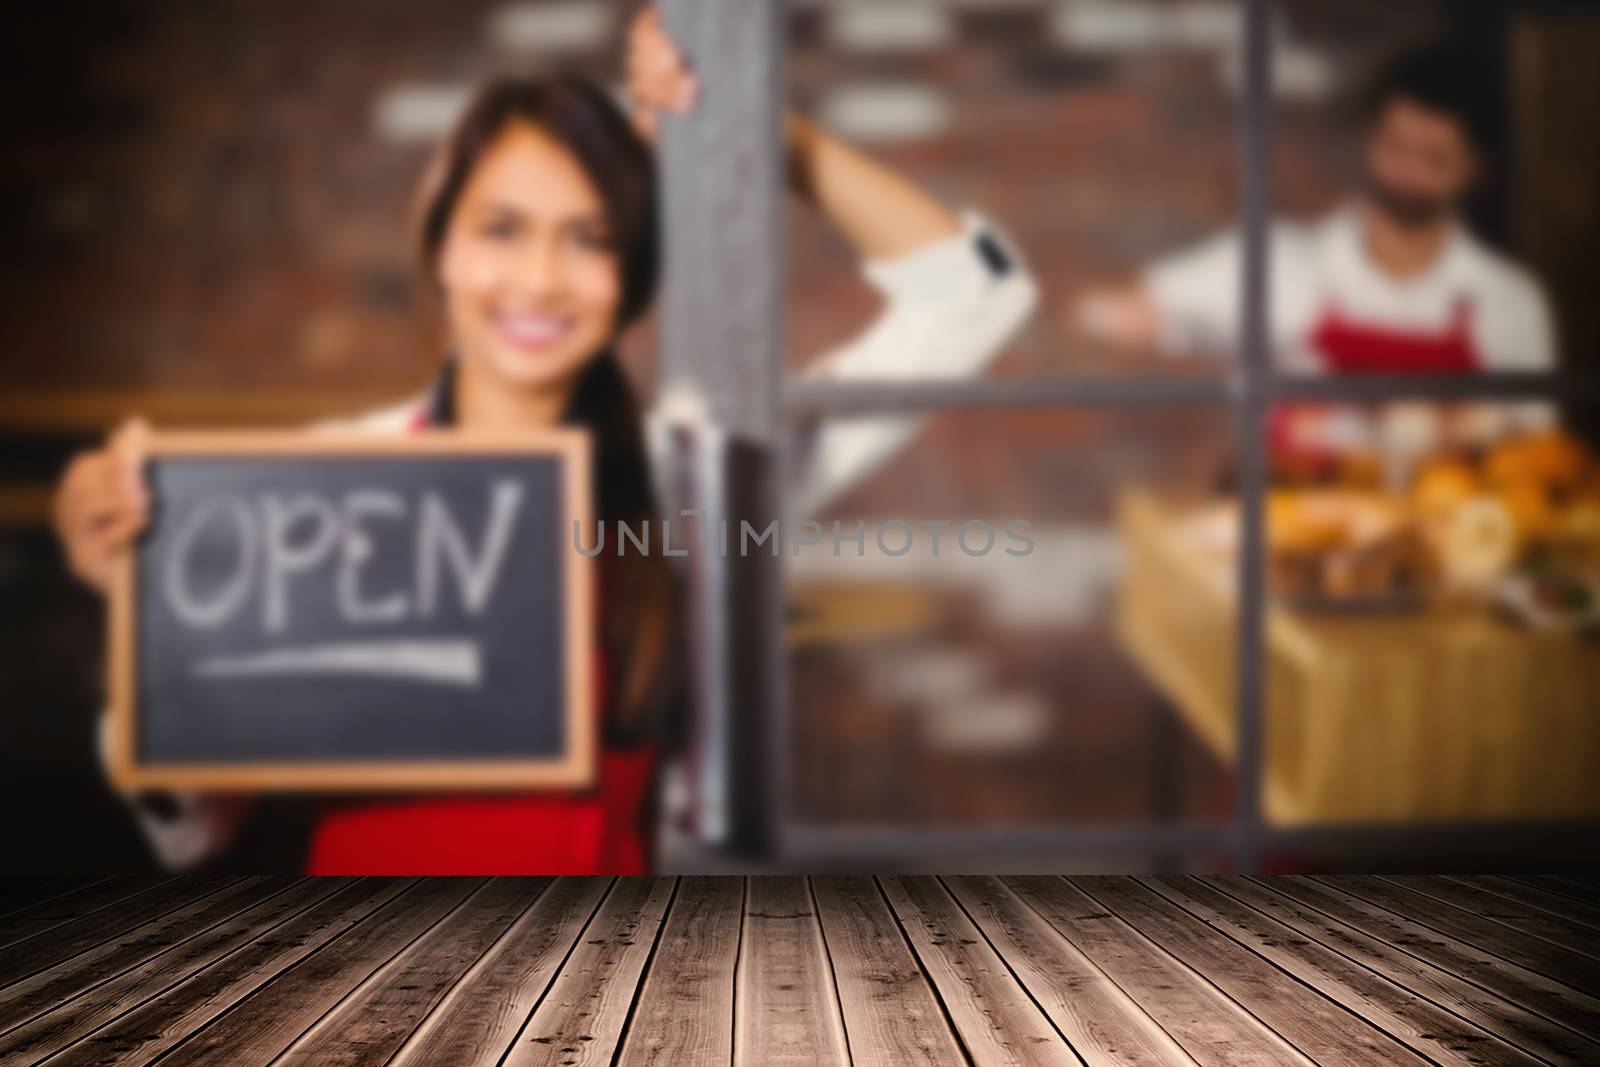 Close-up of wooden flooring against smiling waitress showing chalkboard with open sign 